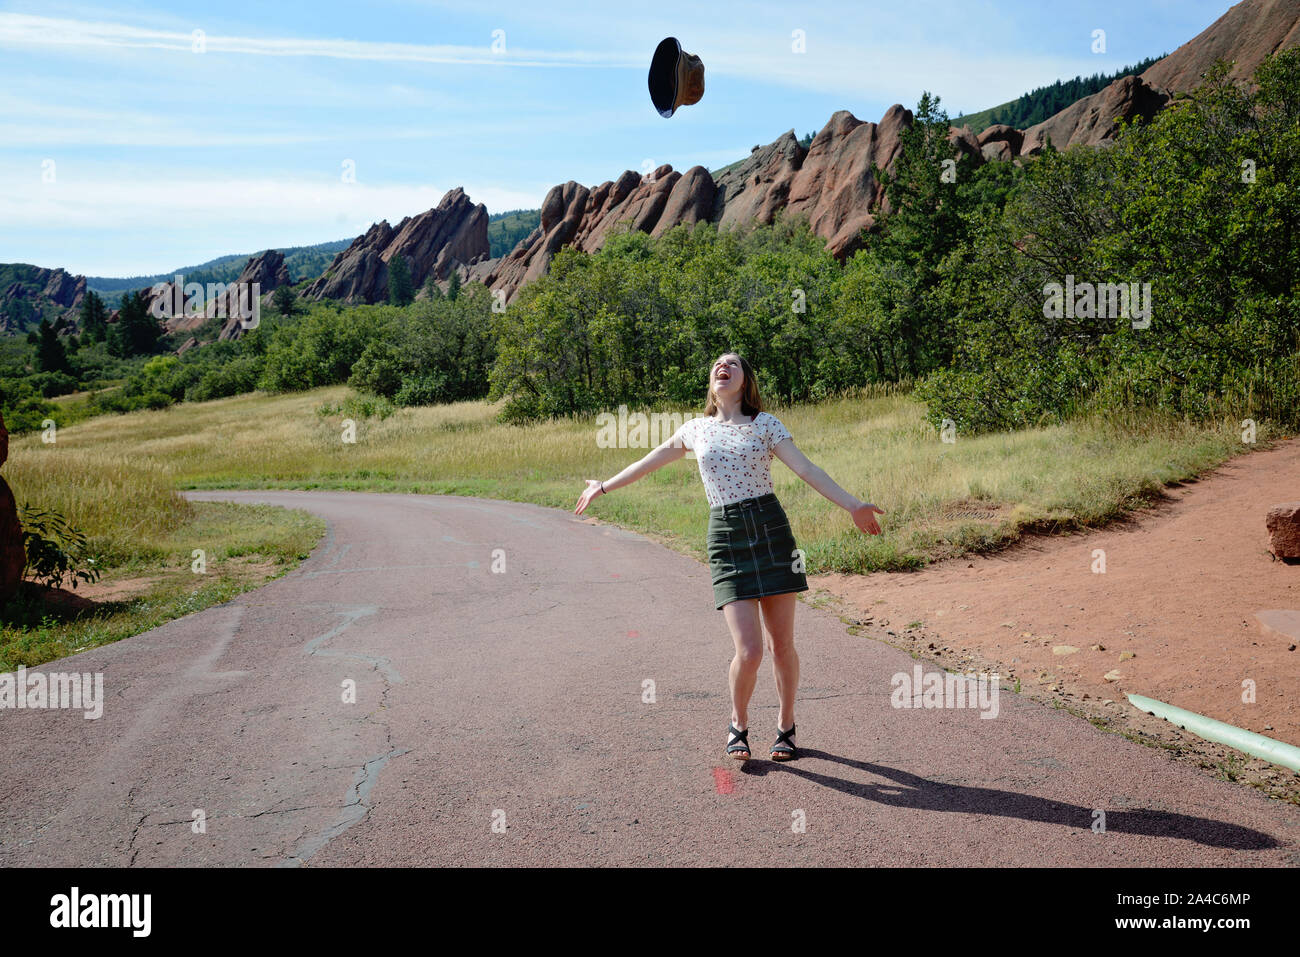 girl throwing hat up in celebration and joy with rocky outcroppings in the background Stock Photo